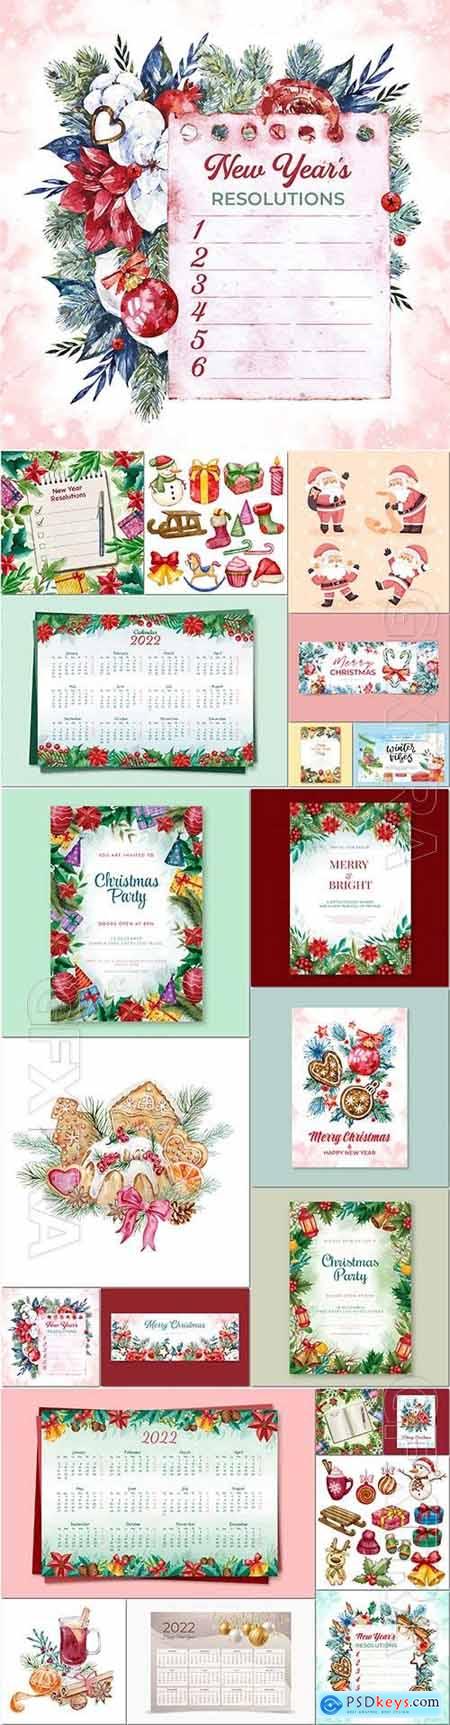 Hand drawn new years elements, party flyer, calendar 2022 template vector collection